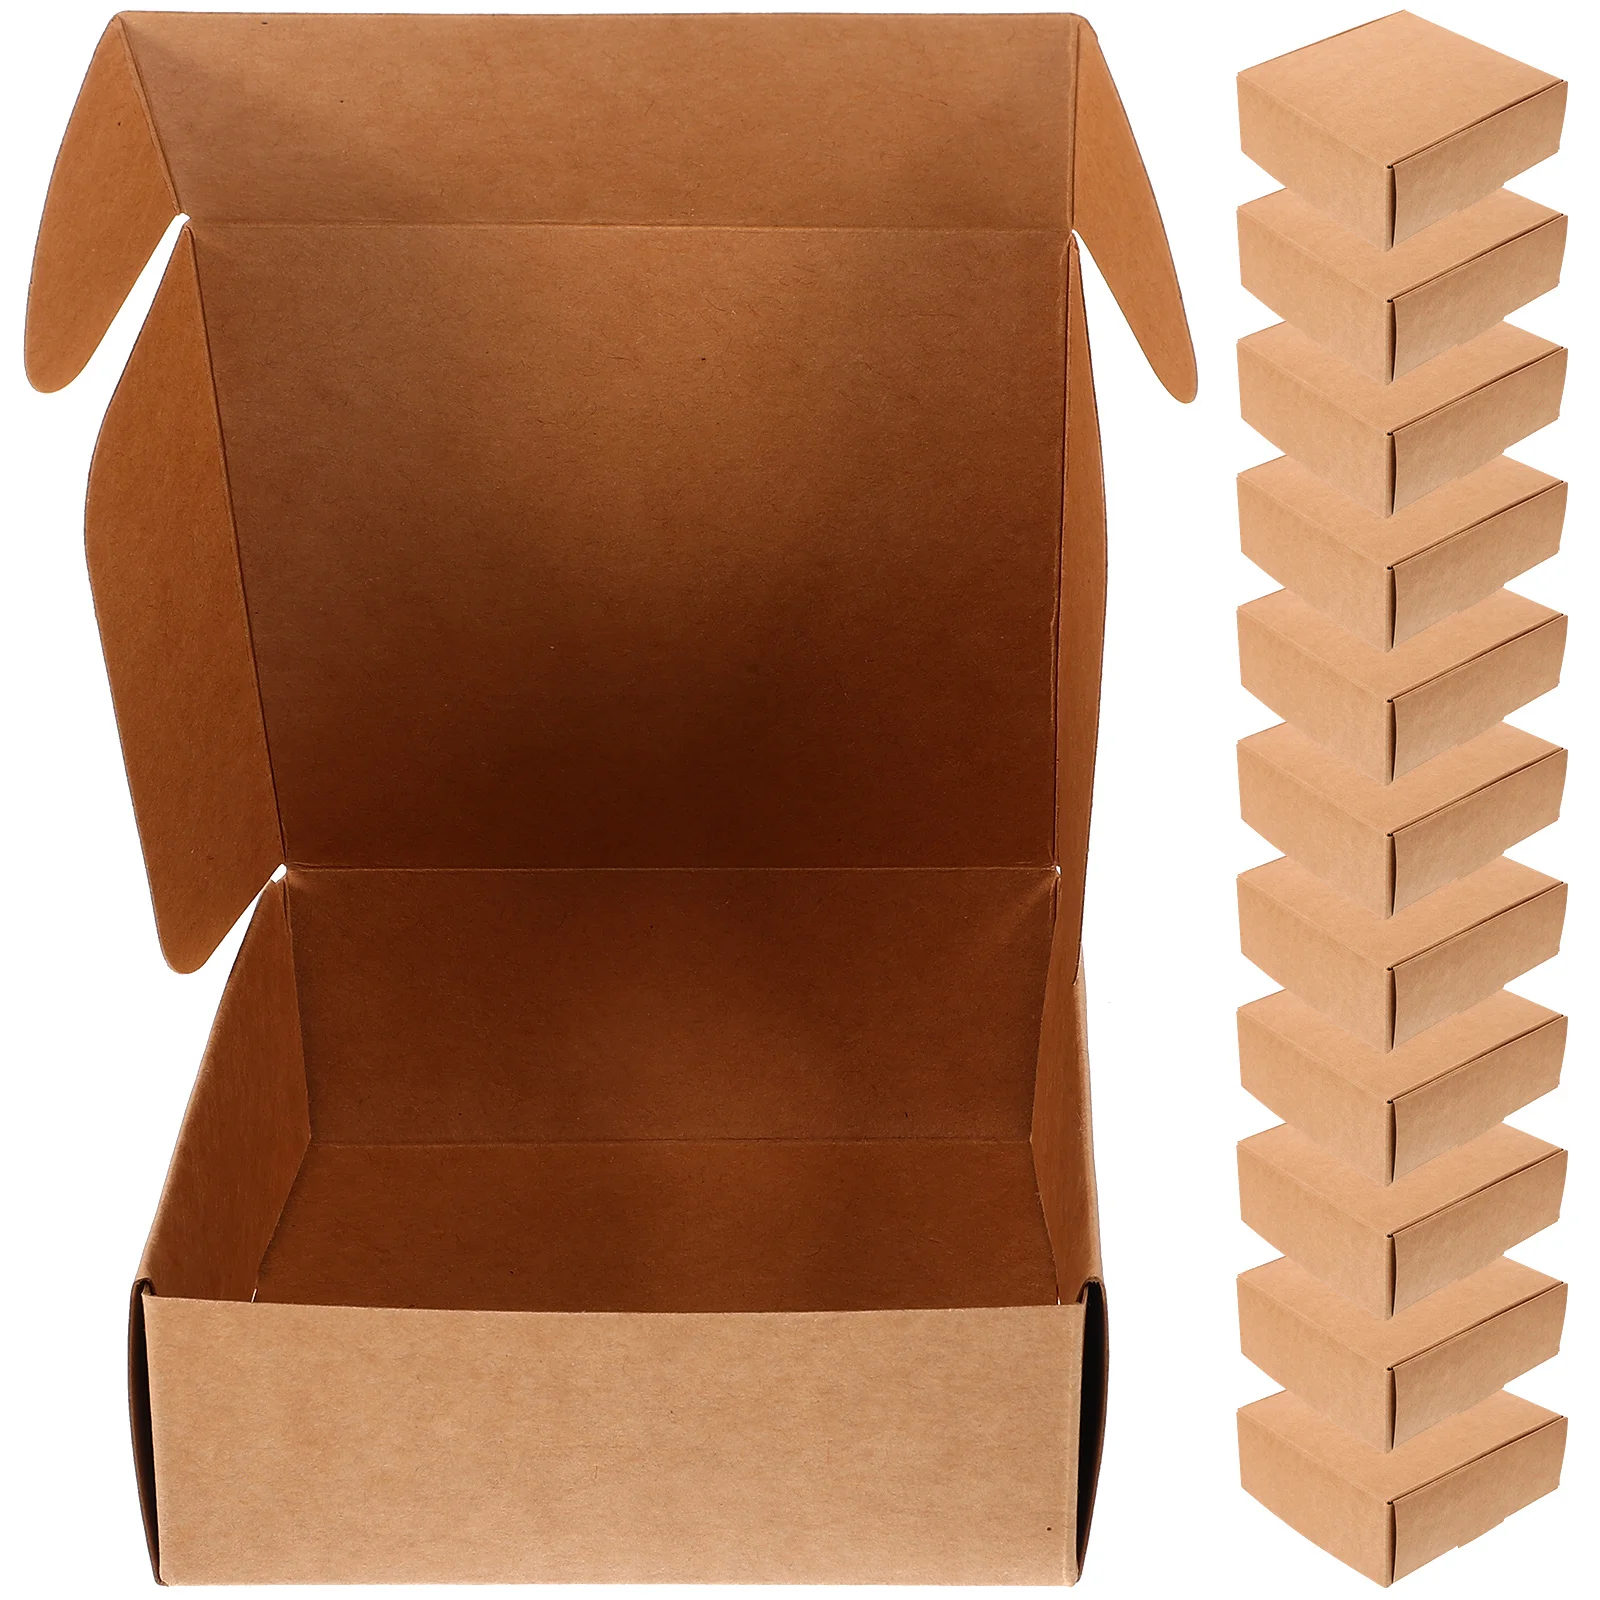 

20 Pcs Kraft Paper Box Soap Wrappers for Homemade Vellum Jewelry Party Gift Case Container Packaging